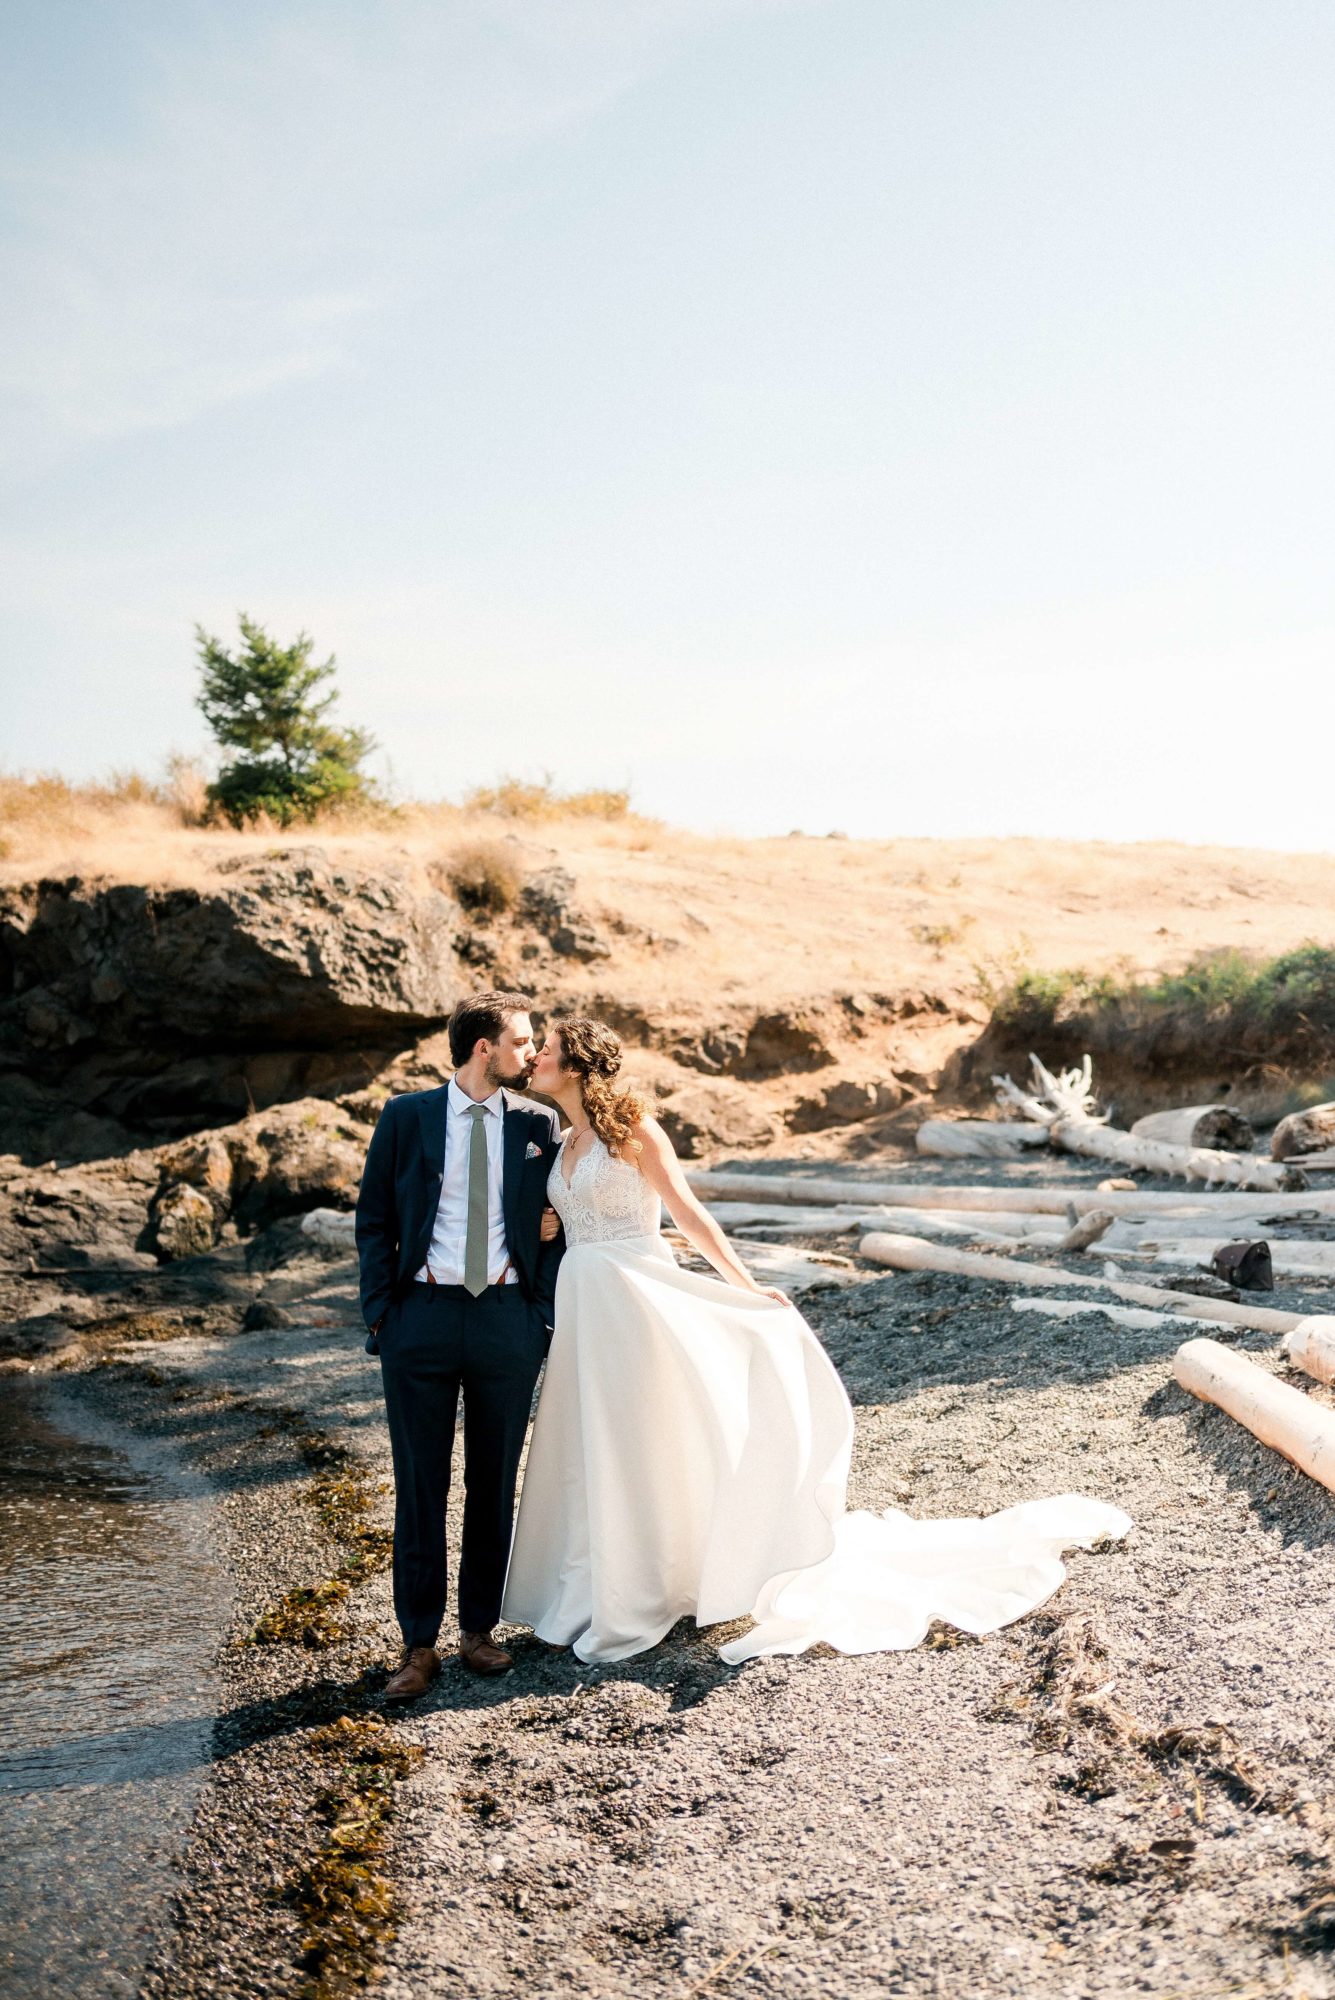 Bride and groom kissing on the beach in the san juan islands